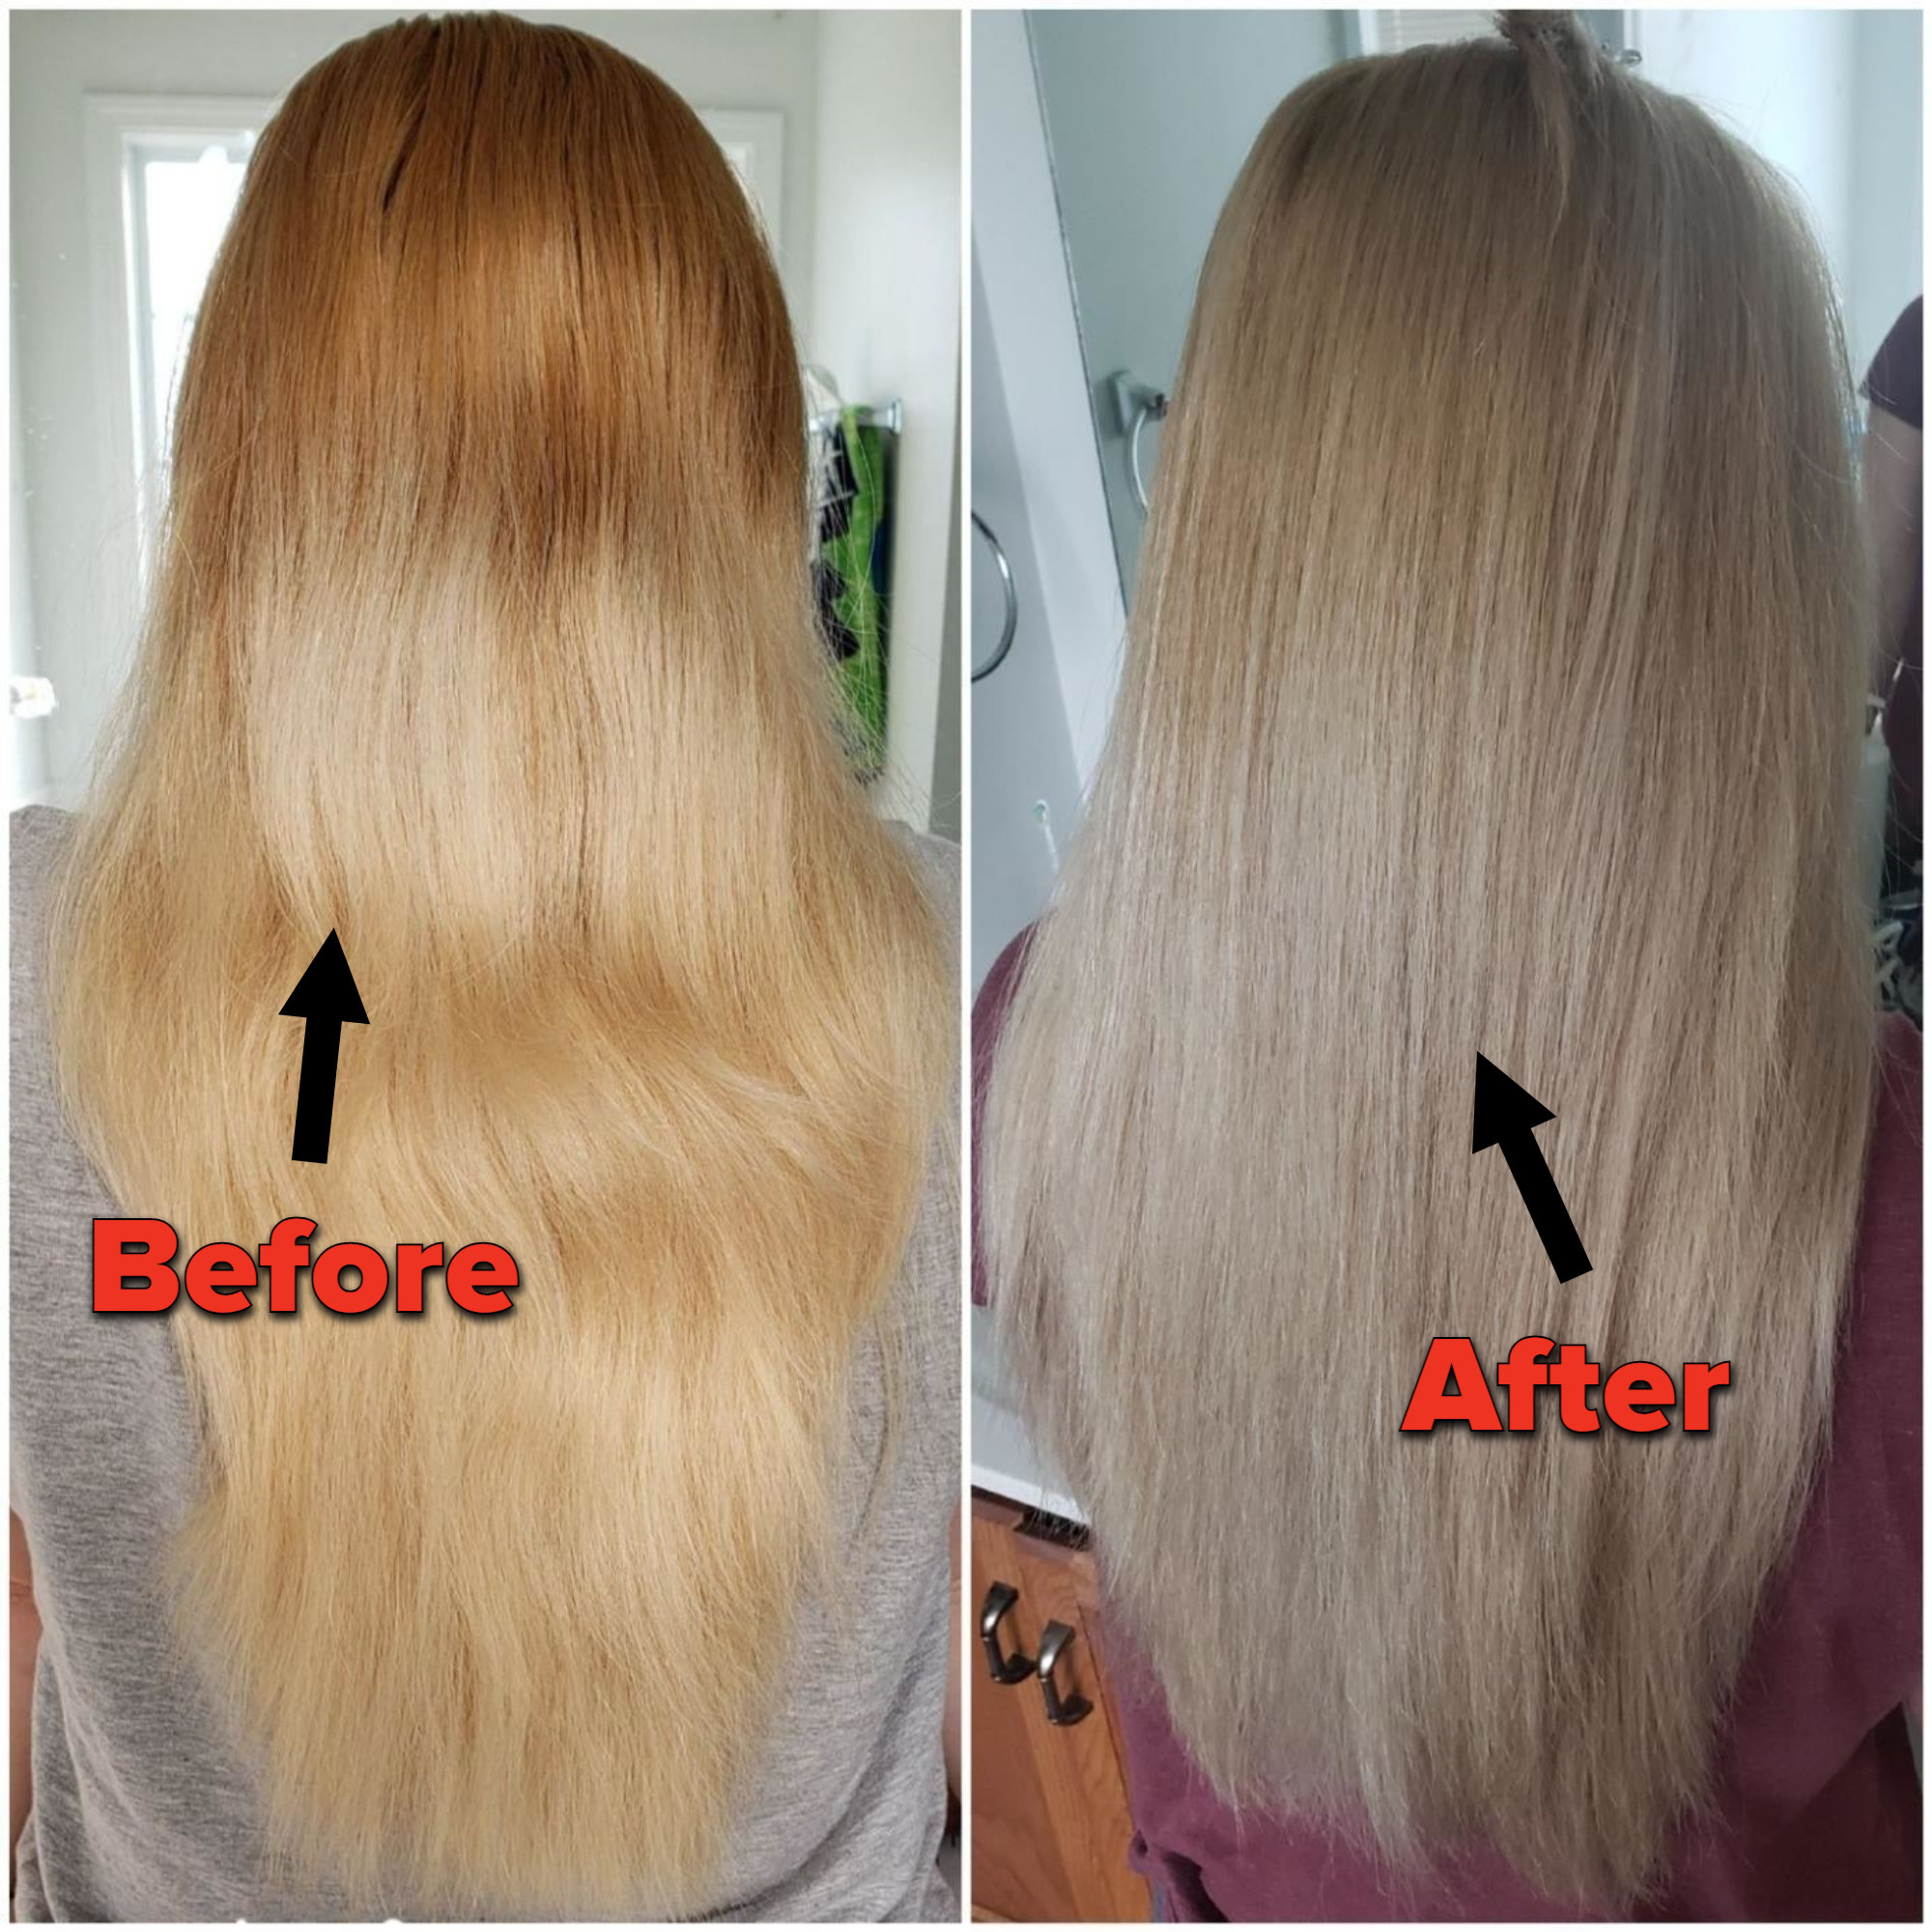 Top 48 Image Hair Toner Before And After Thptnganamst Edu Vn